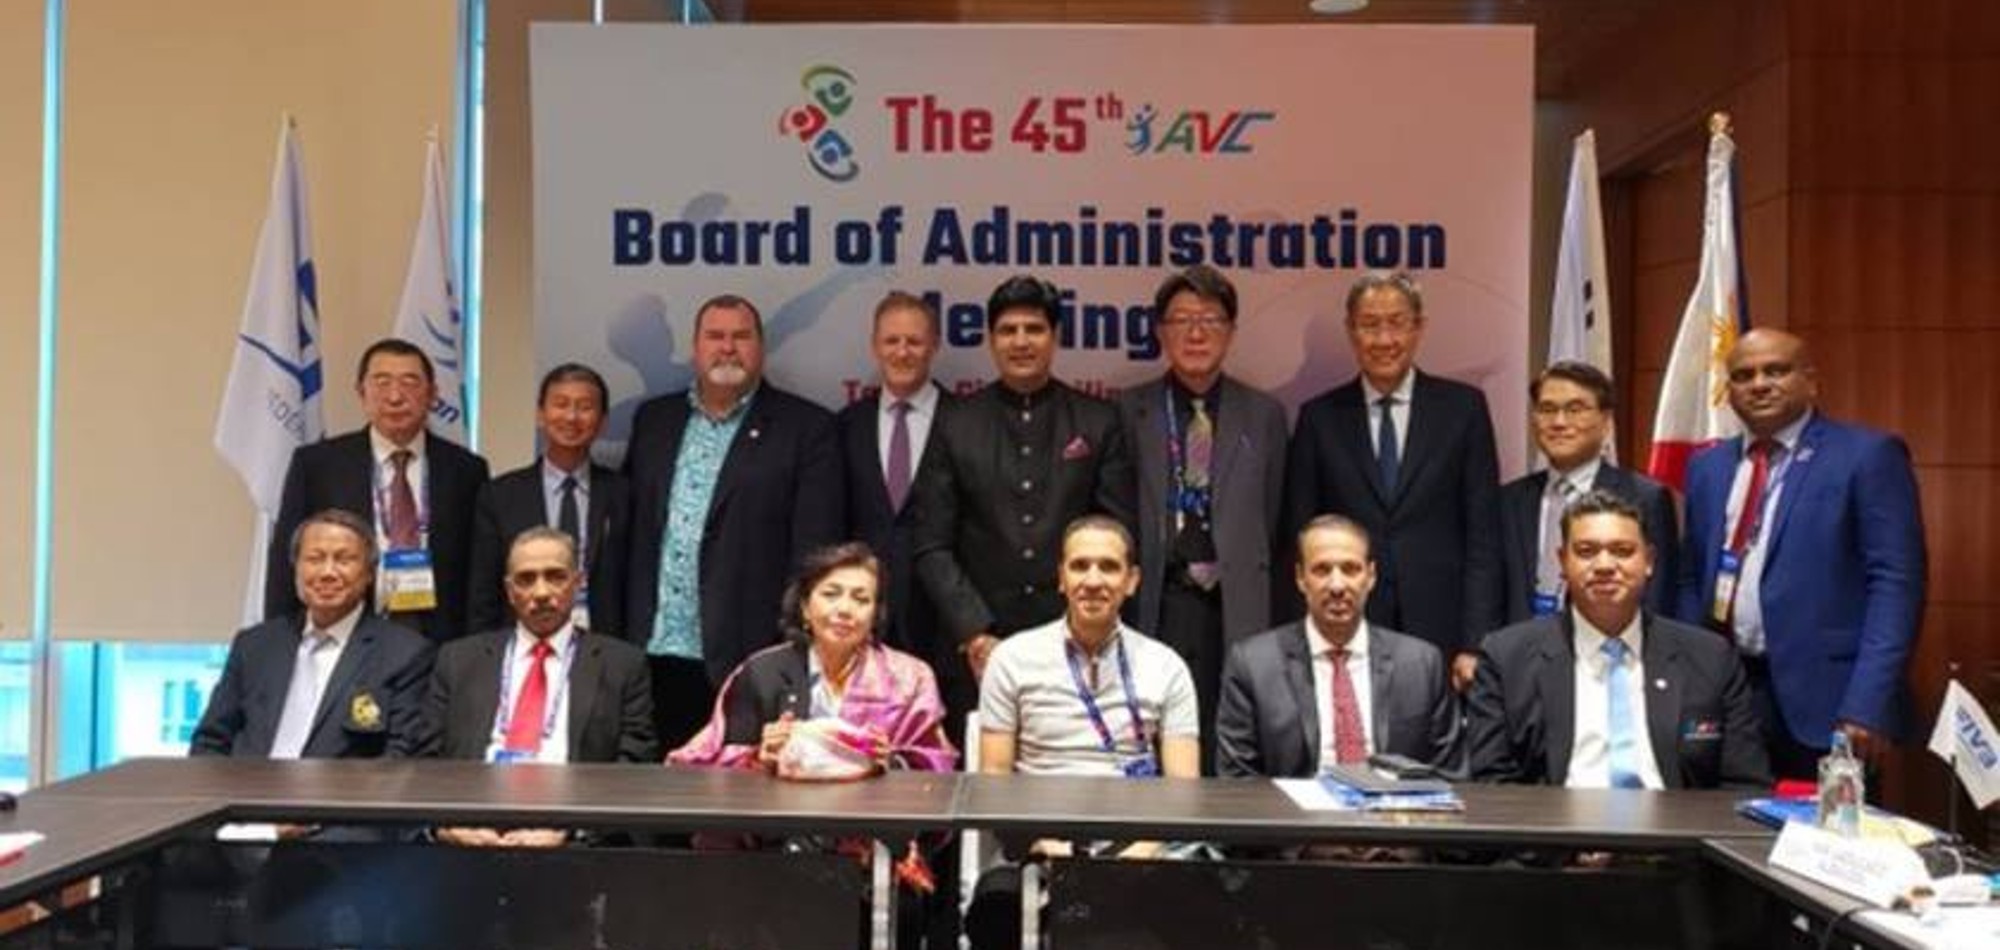 QVA Participates in 45th AVC Board of Administration Meeting